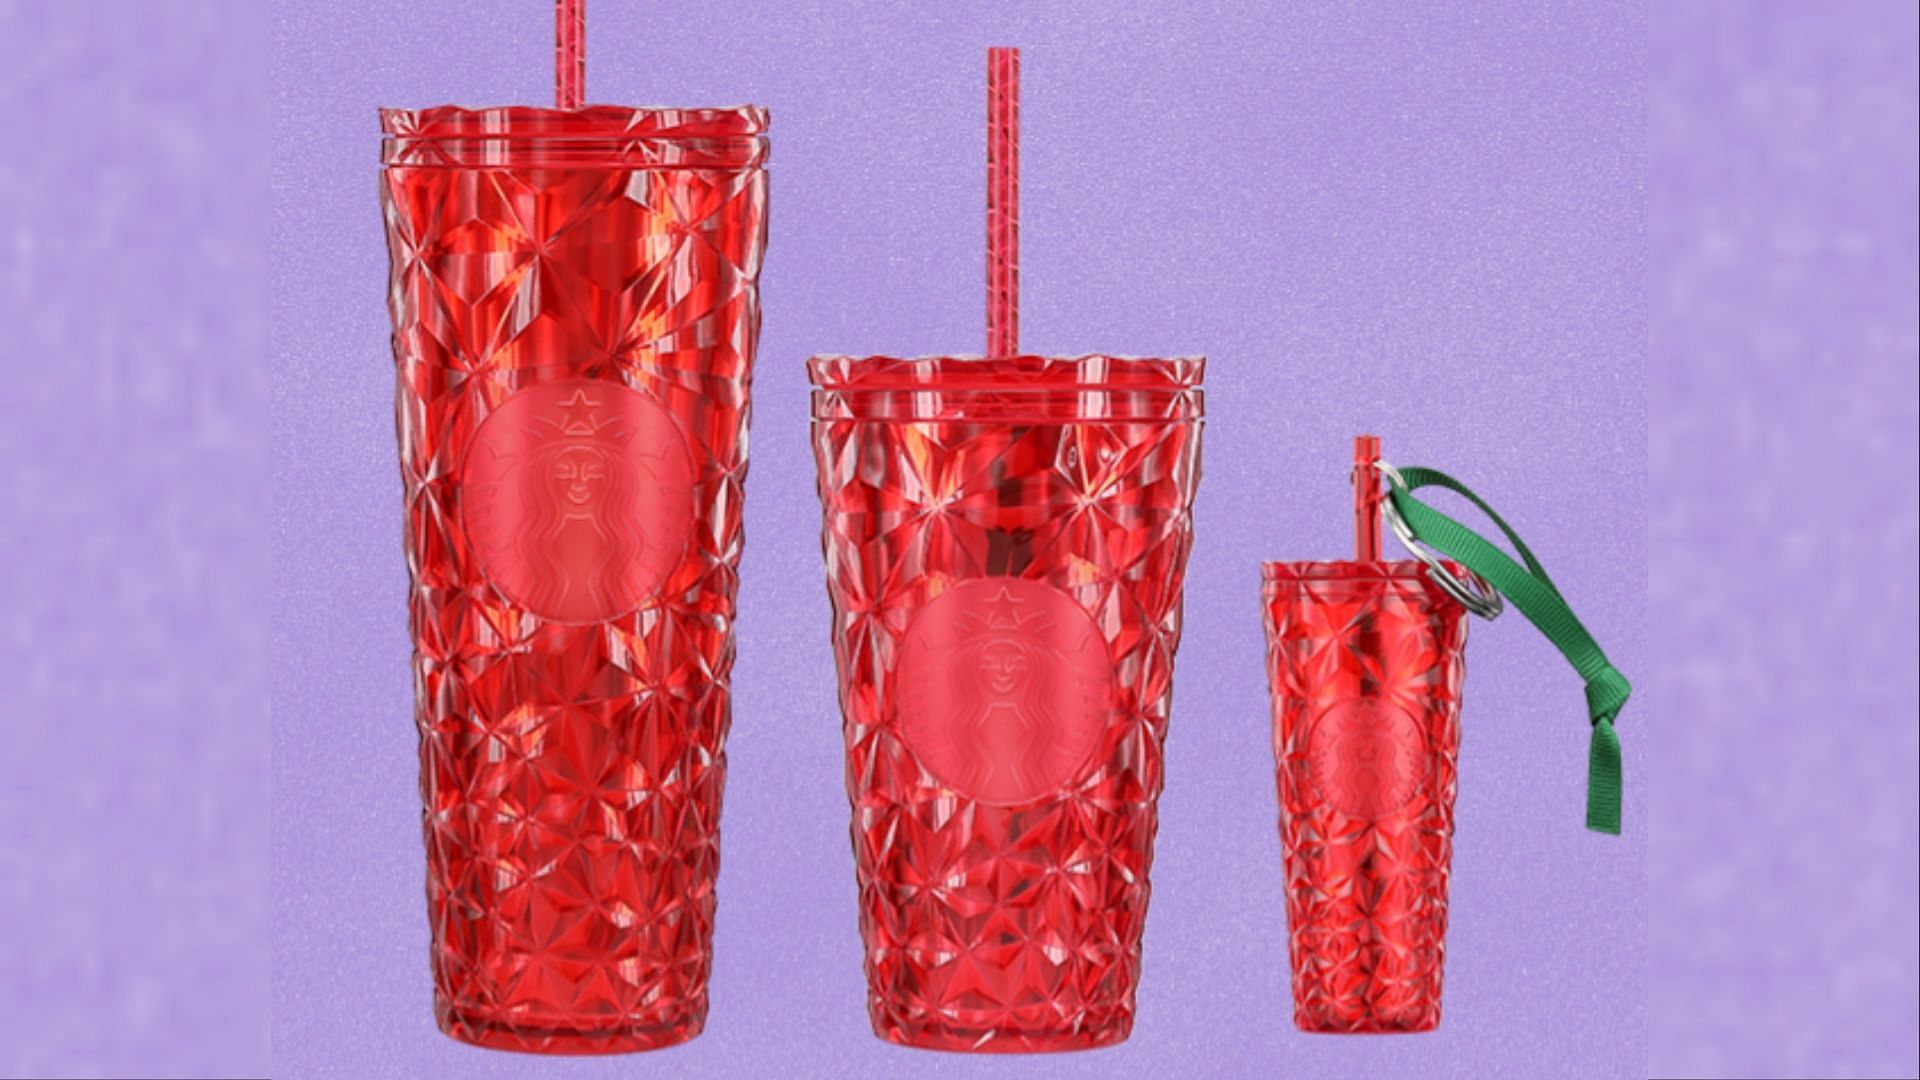 Poinsettia Red Prism Cold Cups and Ornament (Image via Starbucks)